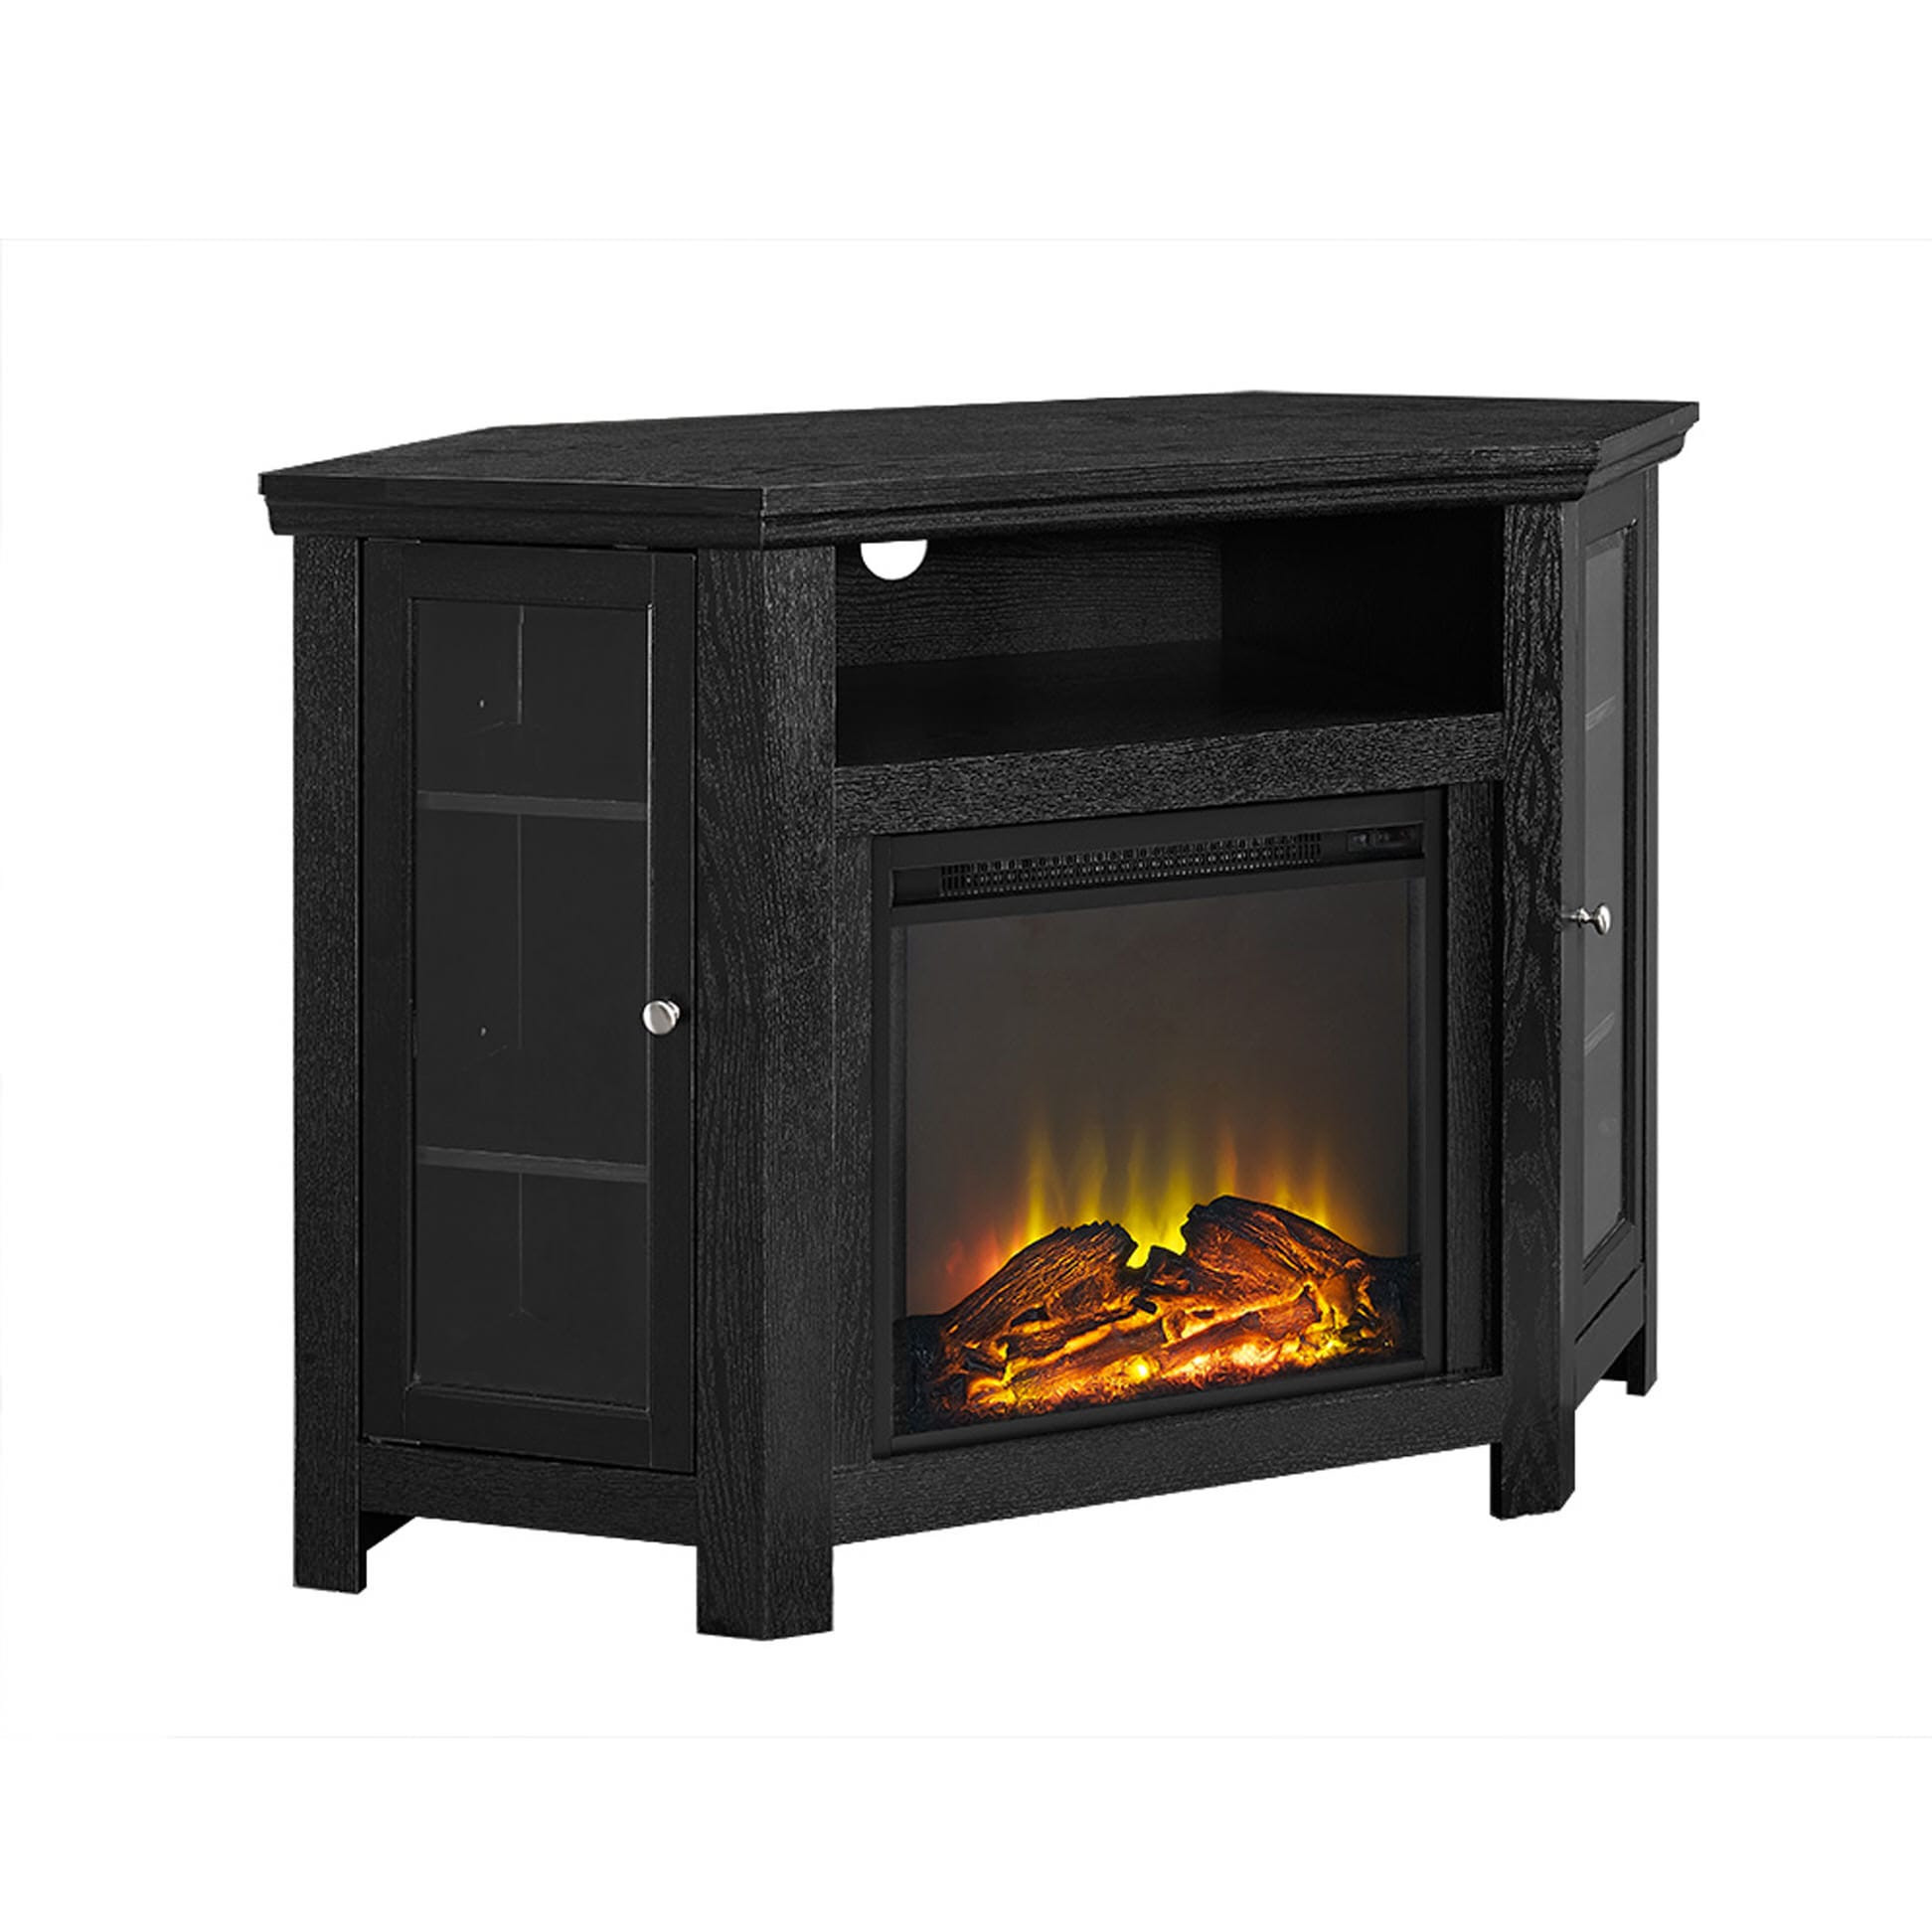 48 Inch Electric Fireplace
 Jackson 48 Inch Corner Fireplace TV Stand Black by